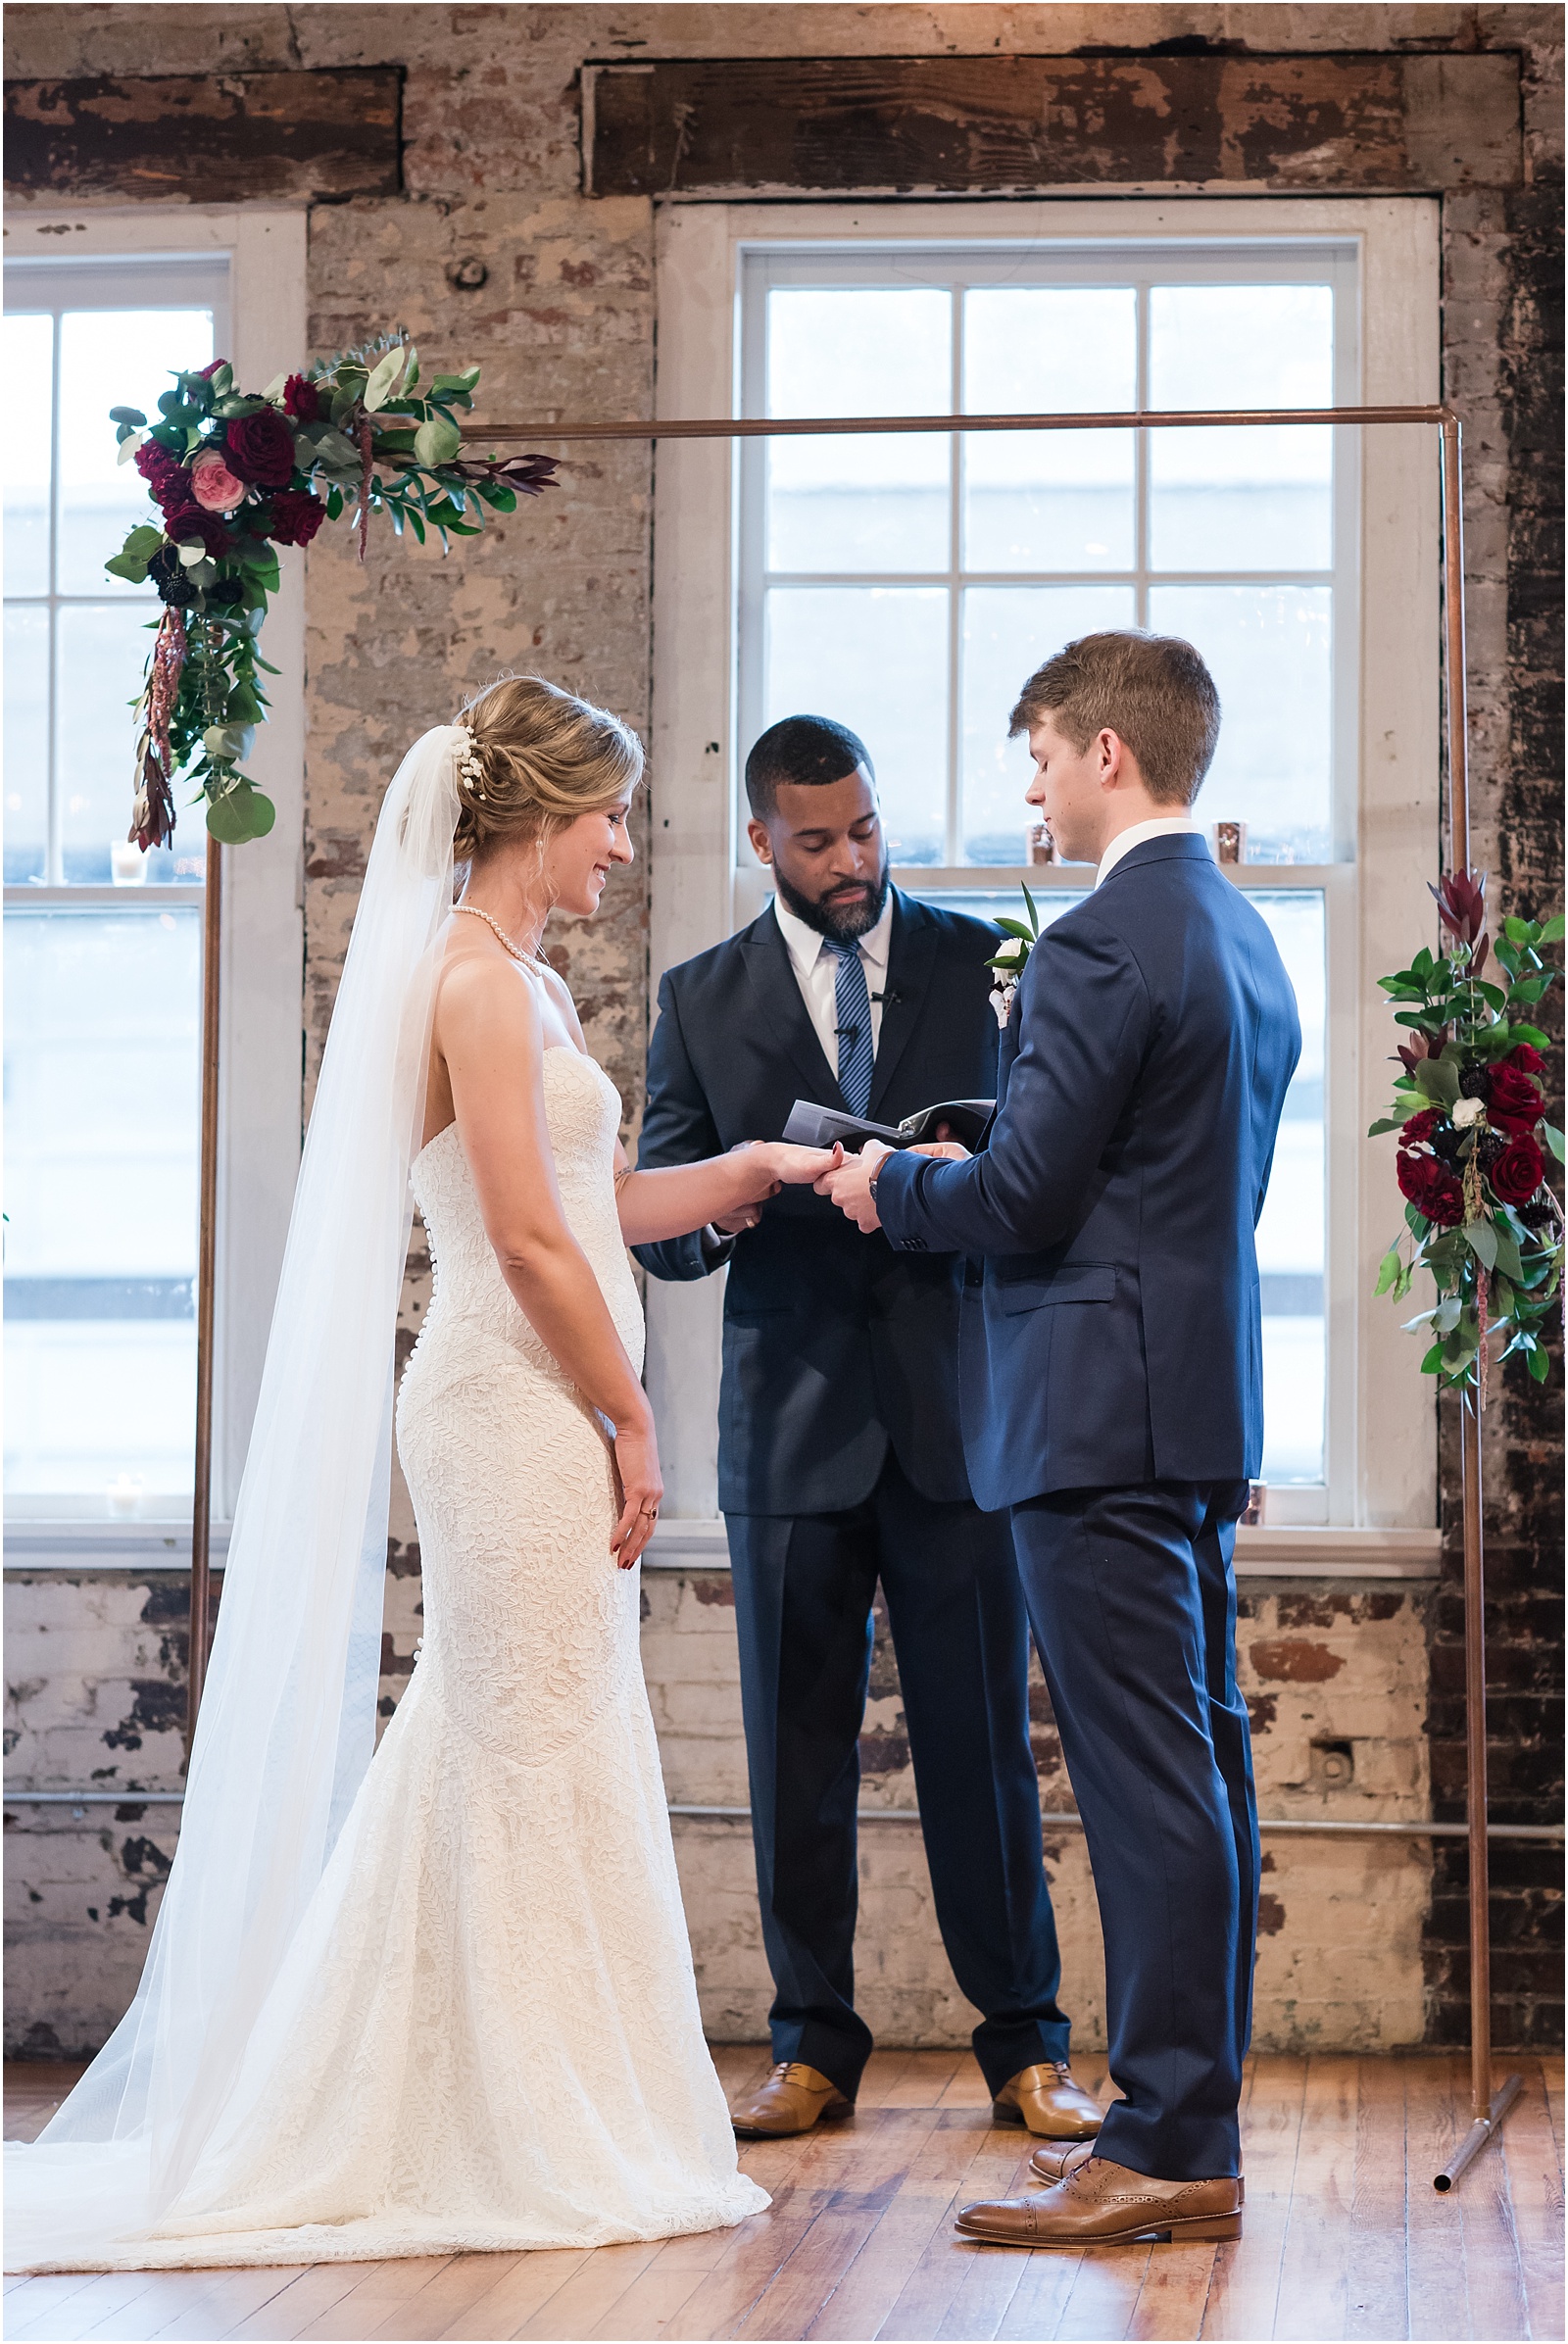 Groom slipping ring on his bride during ceremony at the Stockroom at 230